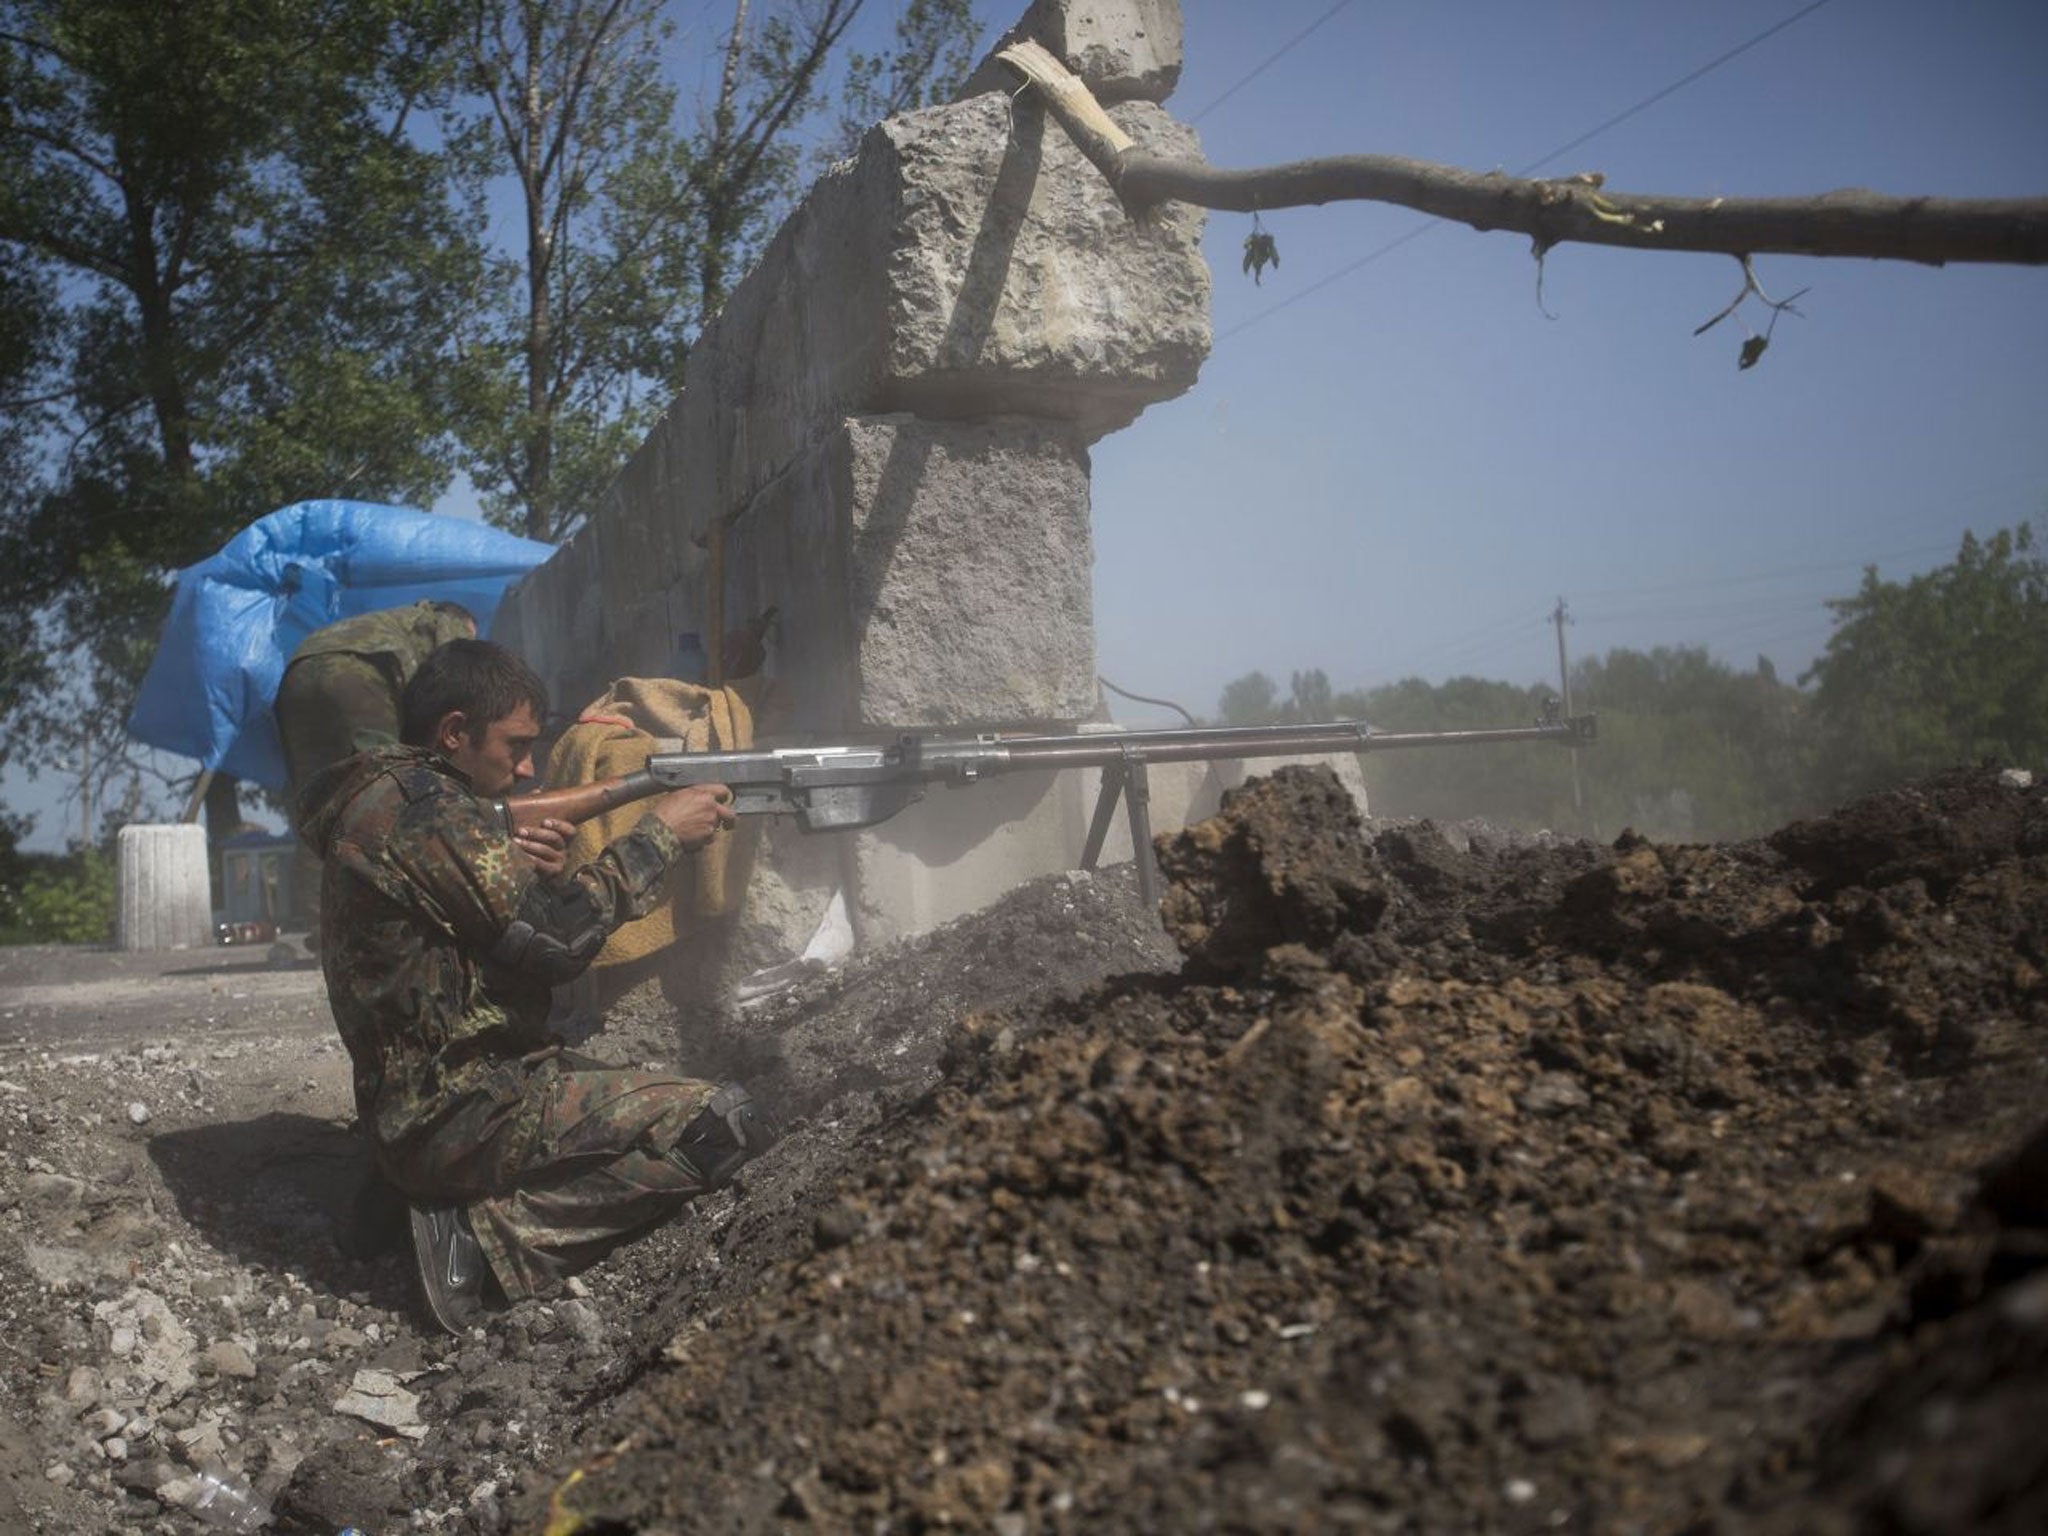 A pro-Russian militant test-fires an anti-tank weapon preparing to fight against Ukrainian government troops at a checkpoint blocking the major highway which links Kharkiv, outside Slovyansk, eastern Ukraine, Sunday, May 18, 2014. Lawmakers and officials